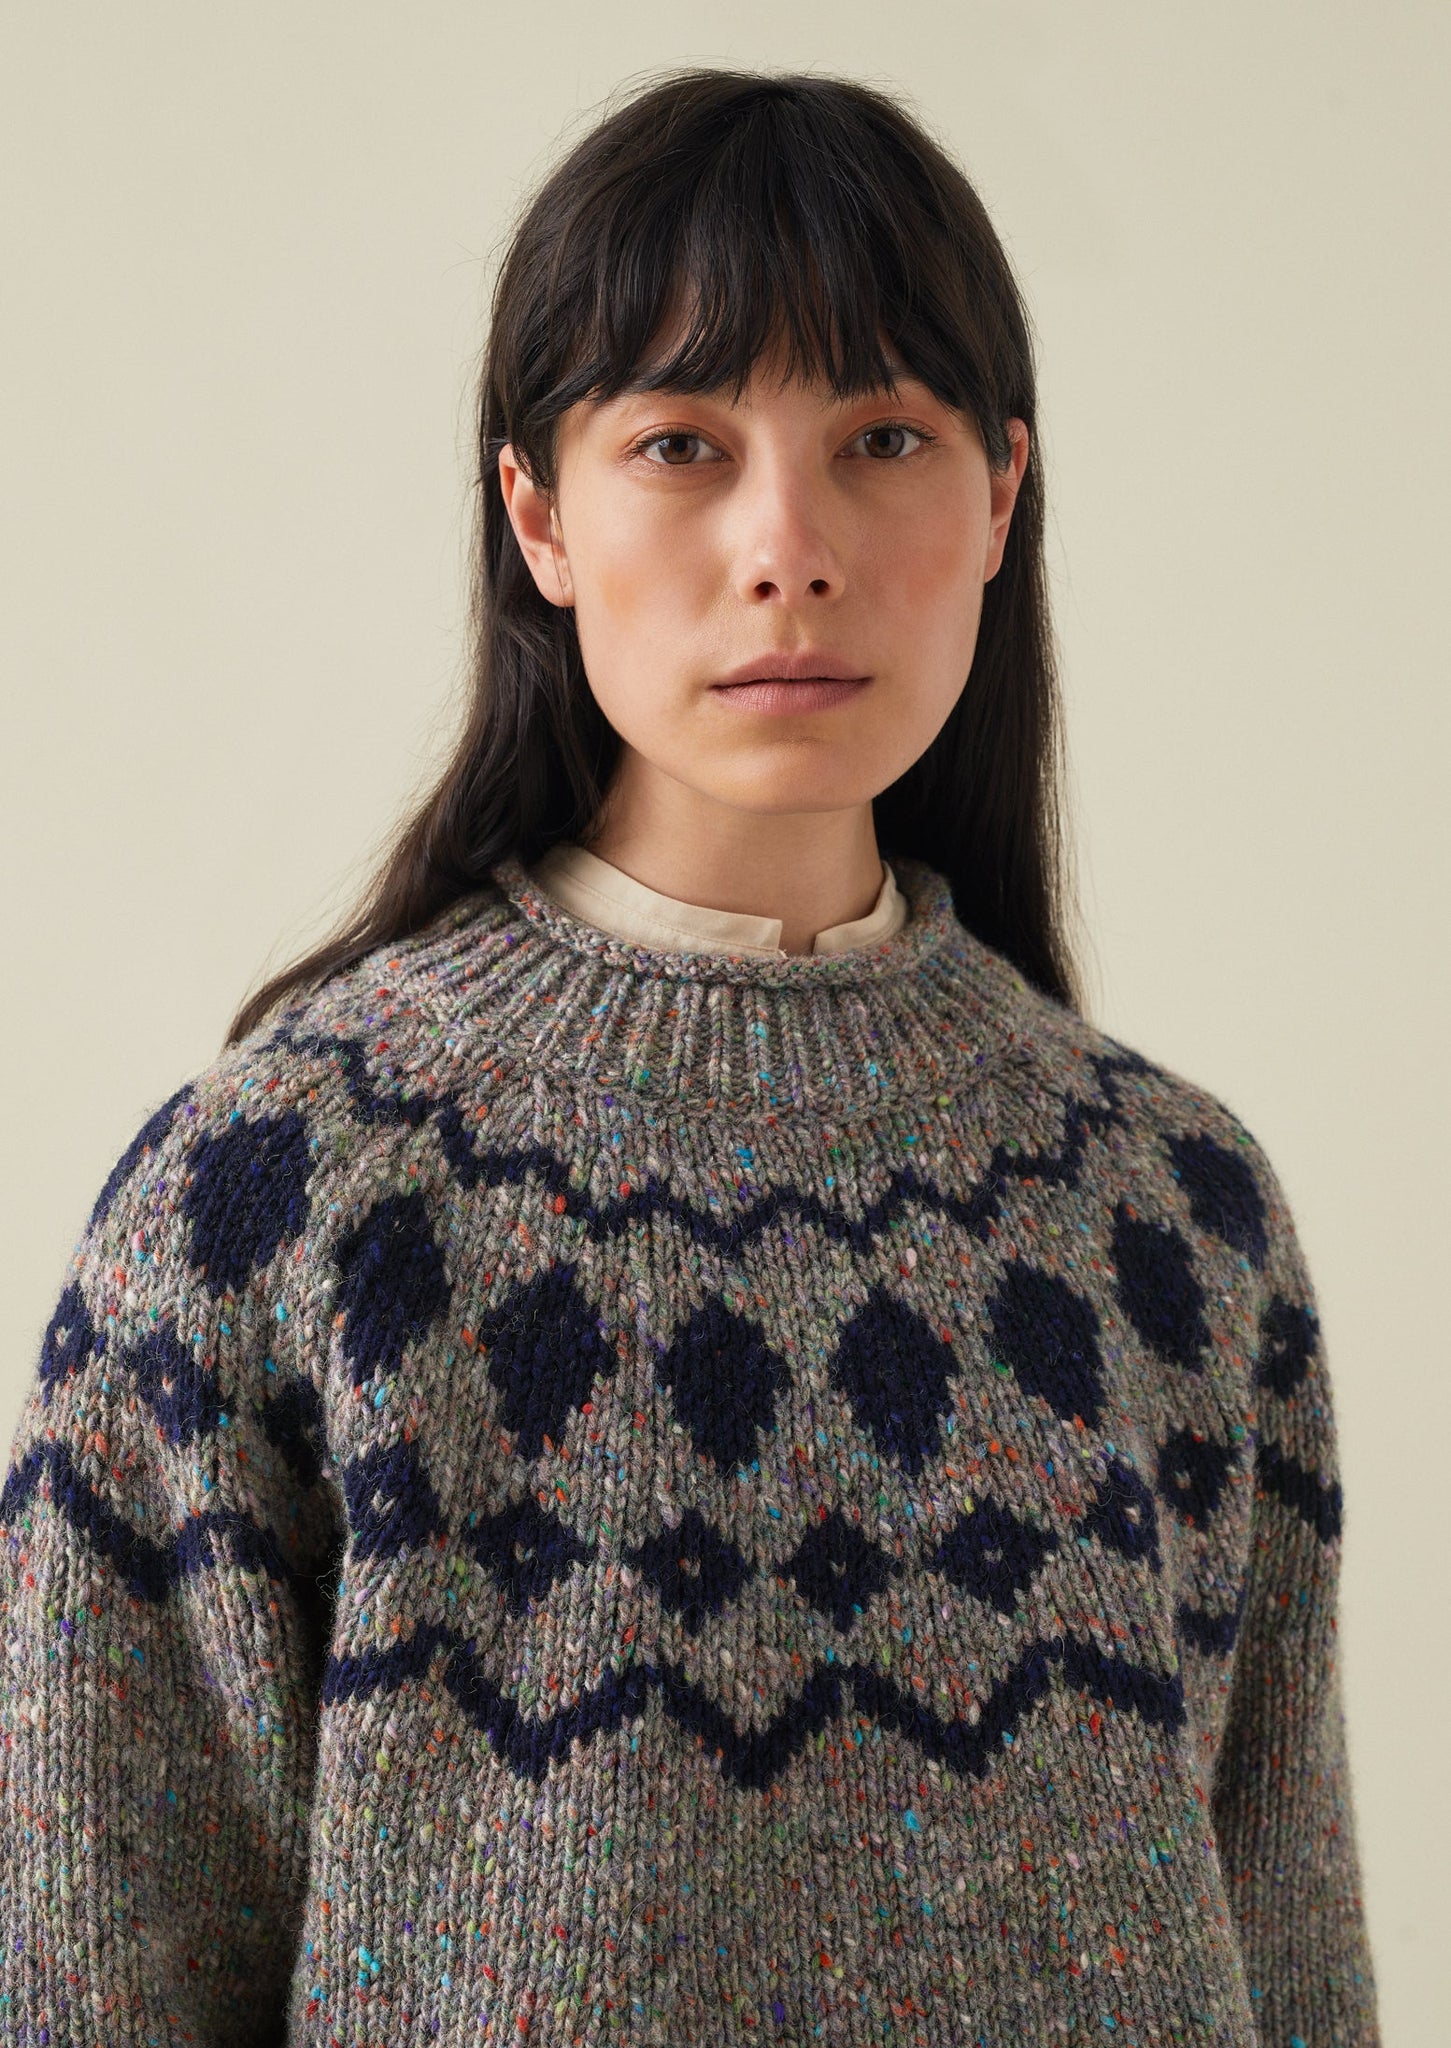 Graphic Yoke Donegal Sweater | Fossil Grey/Navy